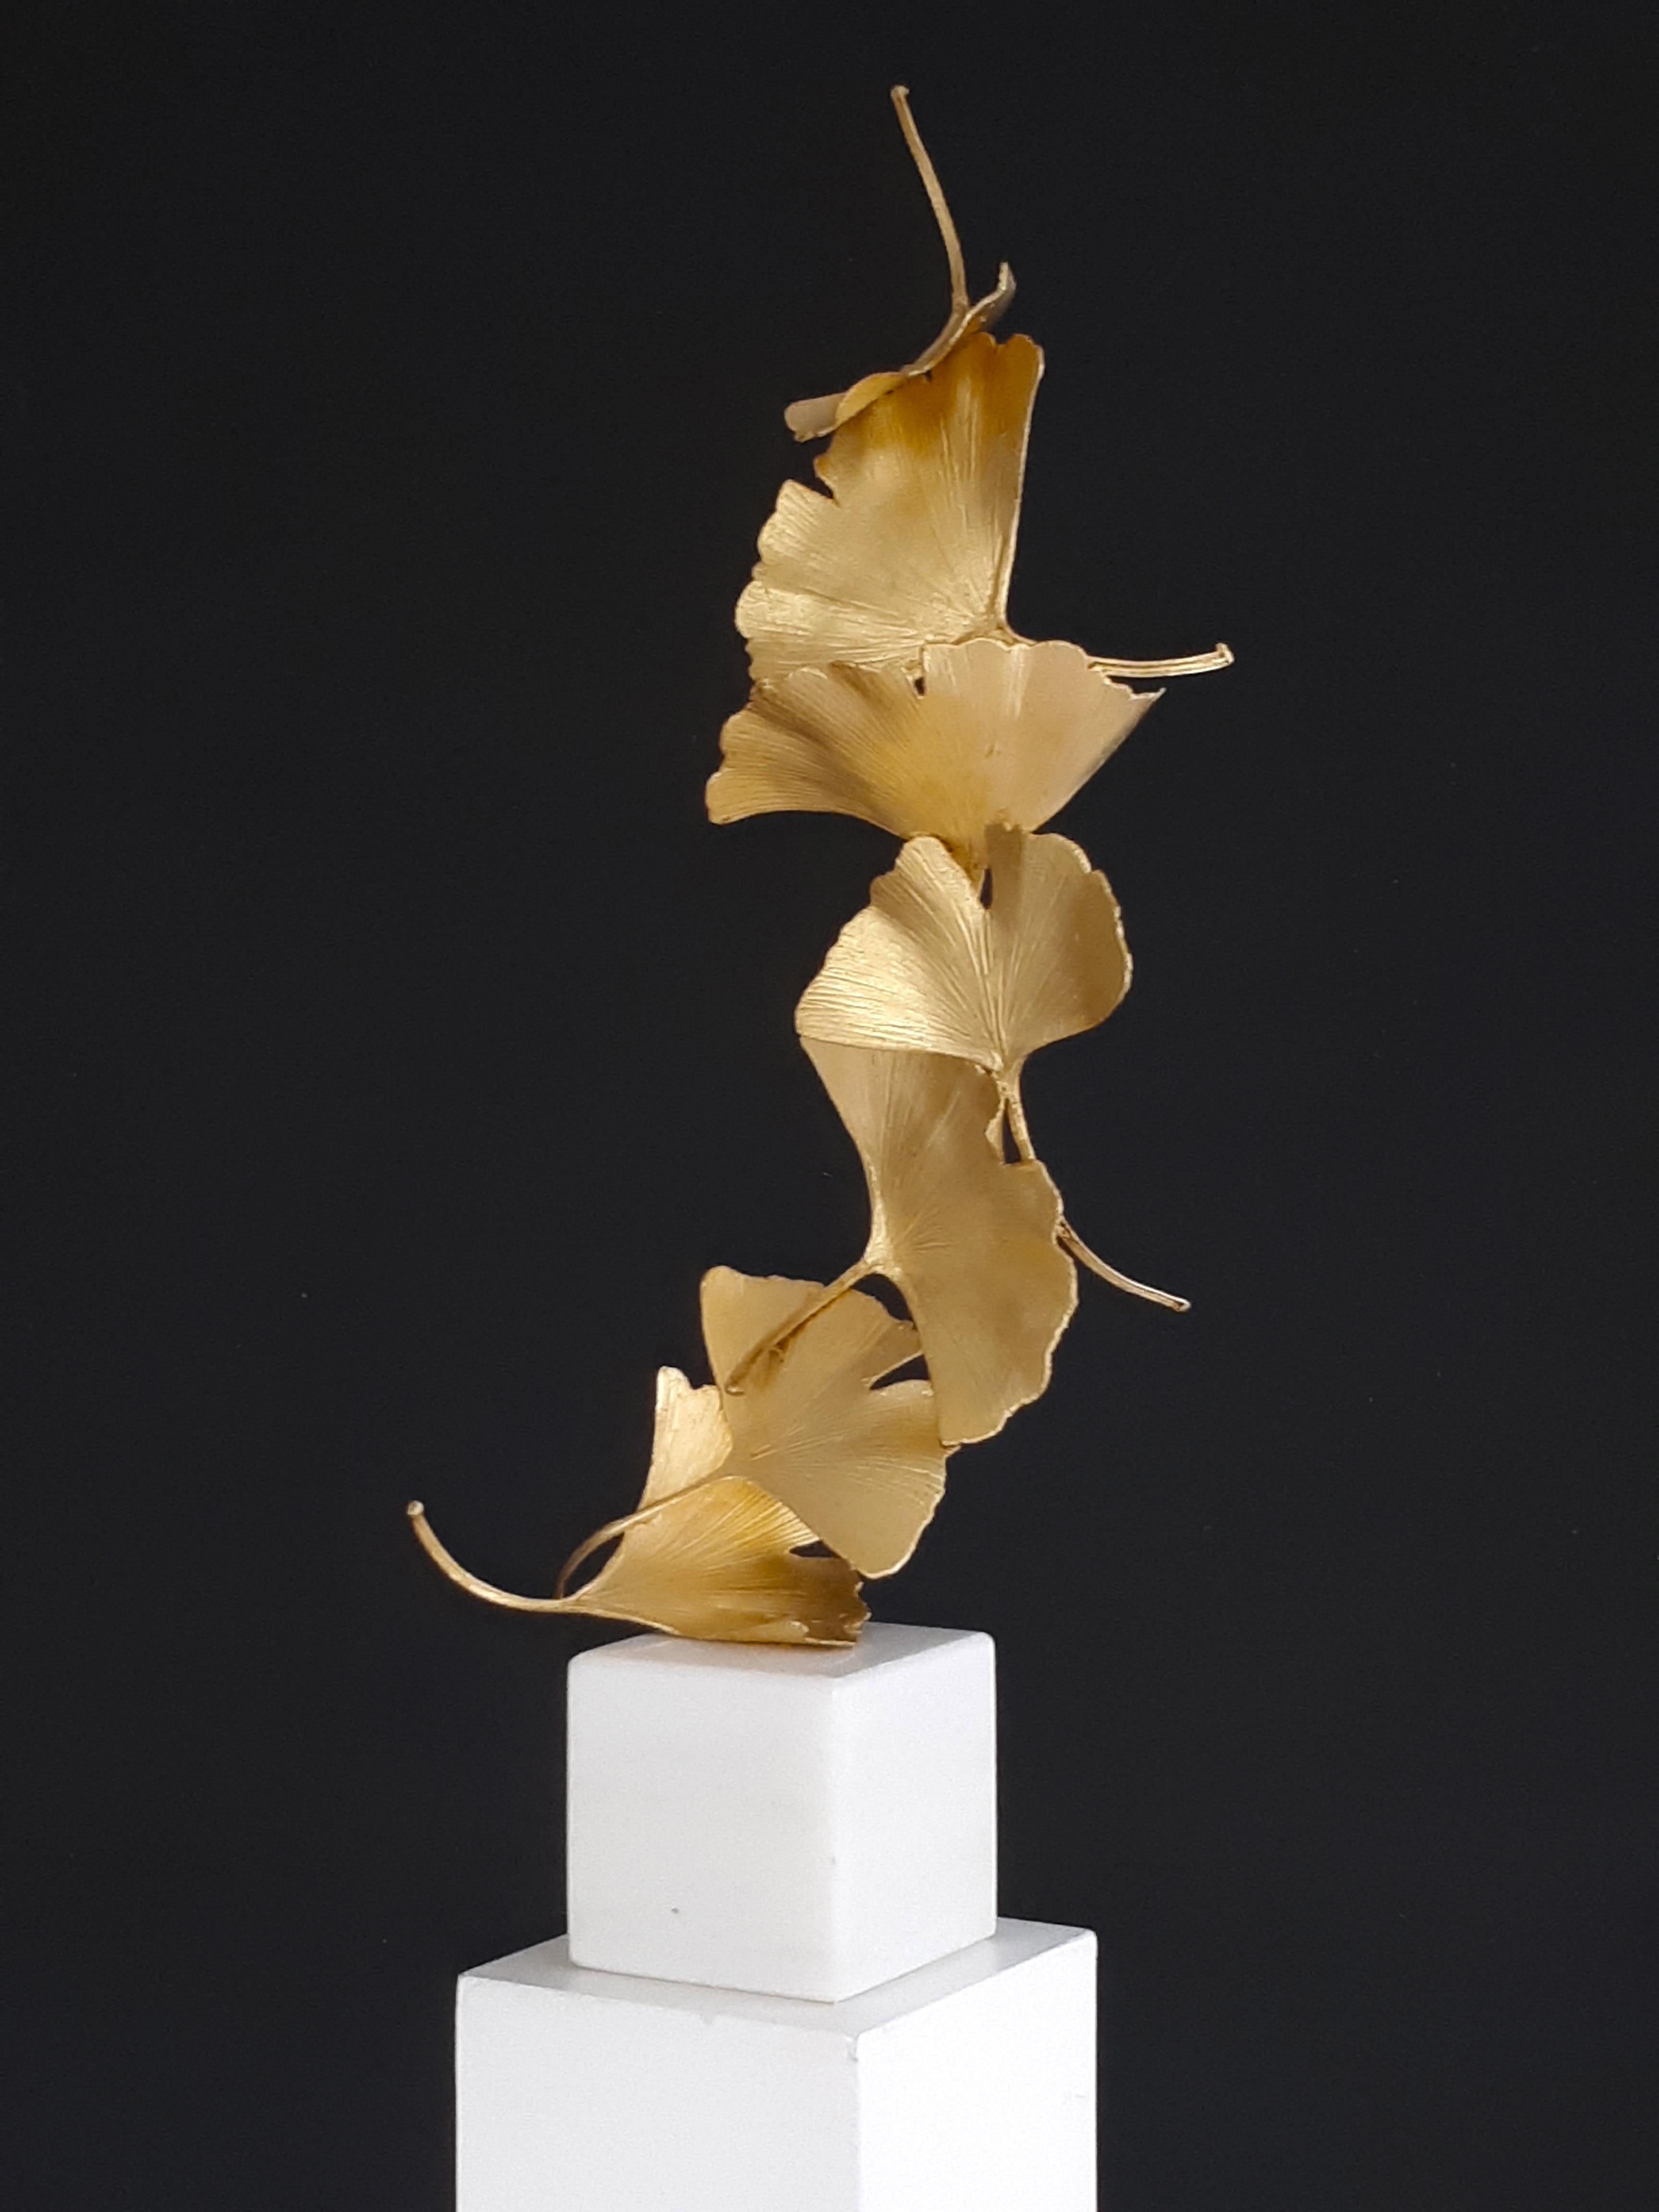 7 Golden Gingko Leaves - Cast Brass golden sculpture on white marble base - Contemporary Sculpture by Kuno Vollet